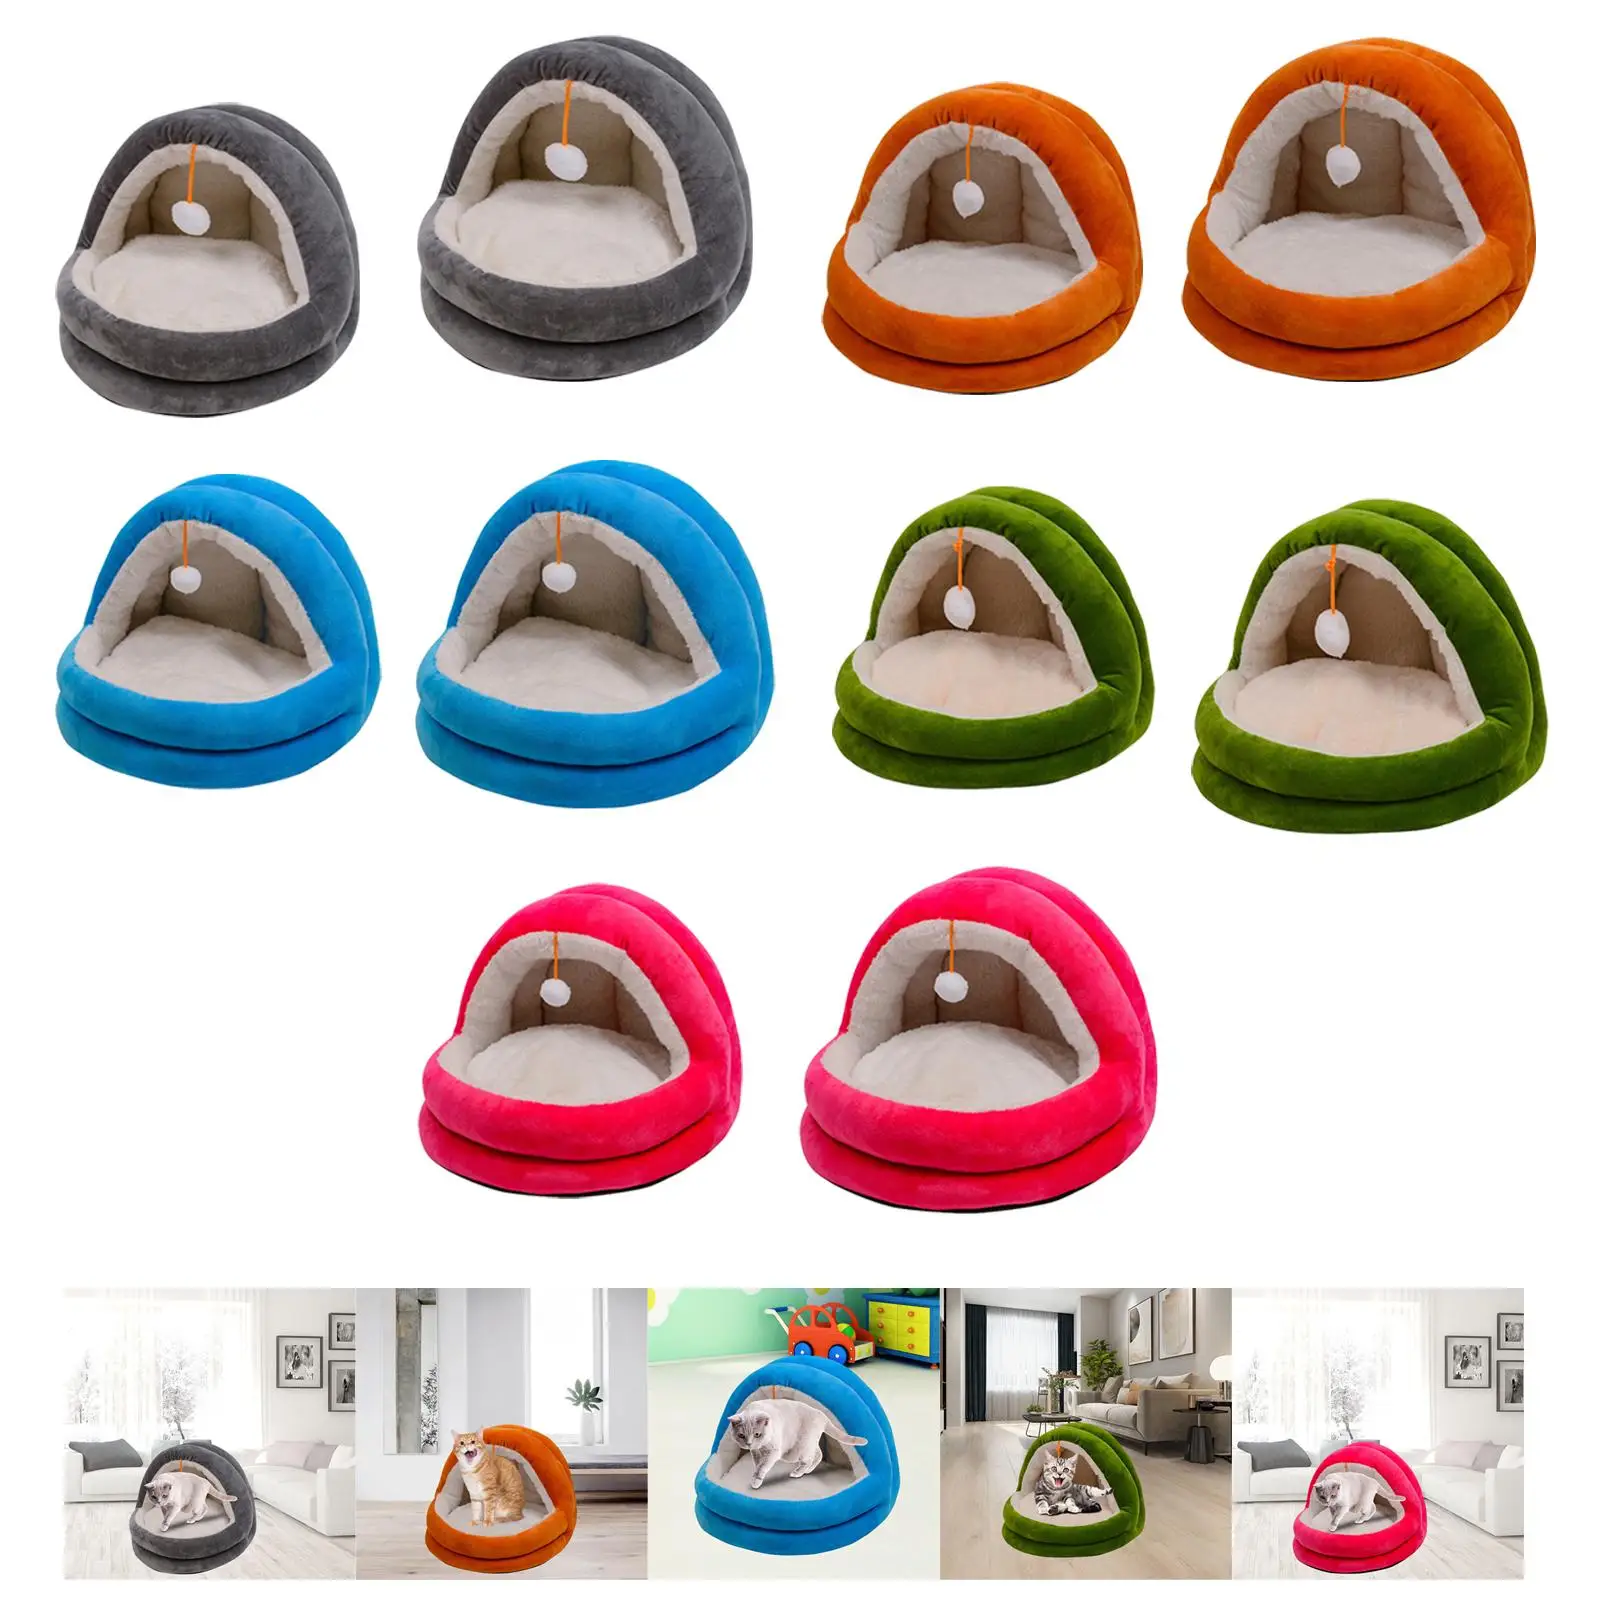 Portable Cat Bed Puppy Kennel Comfortable Kitten House Warm Nest with Hanging